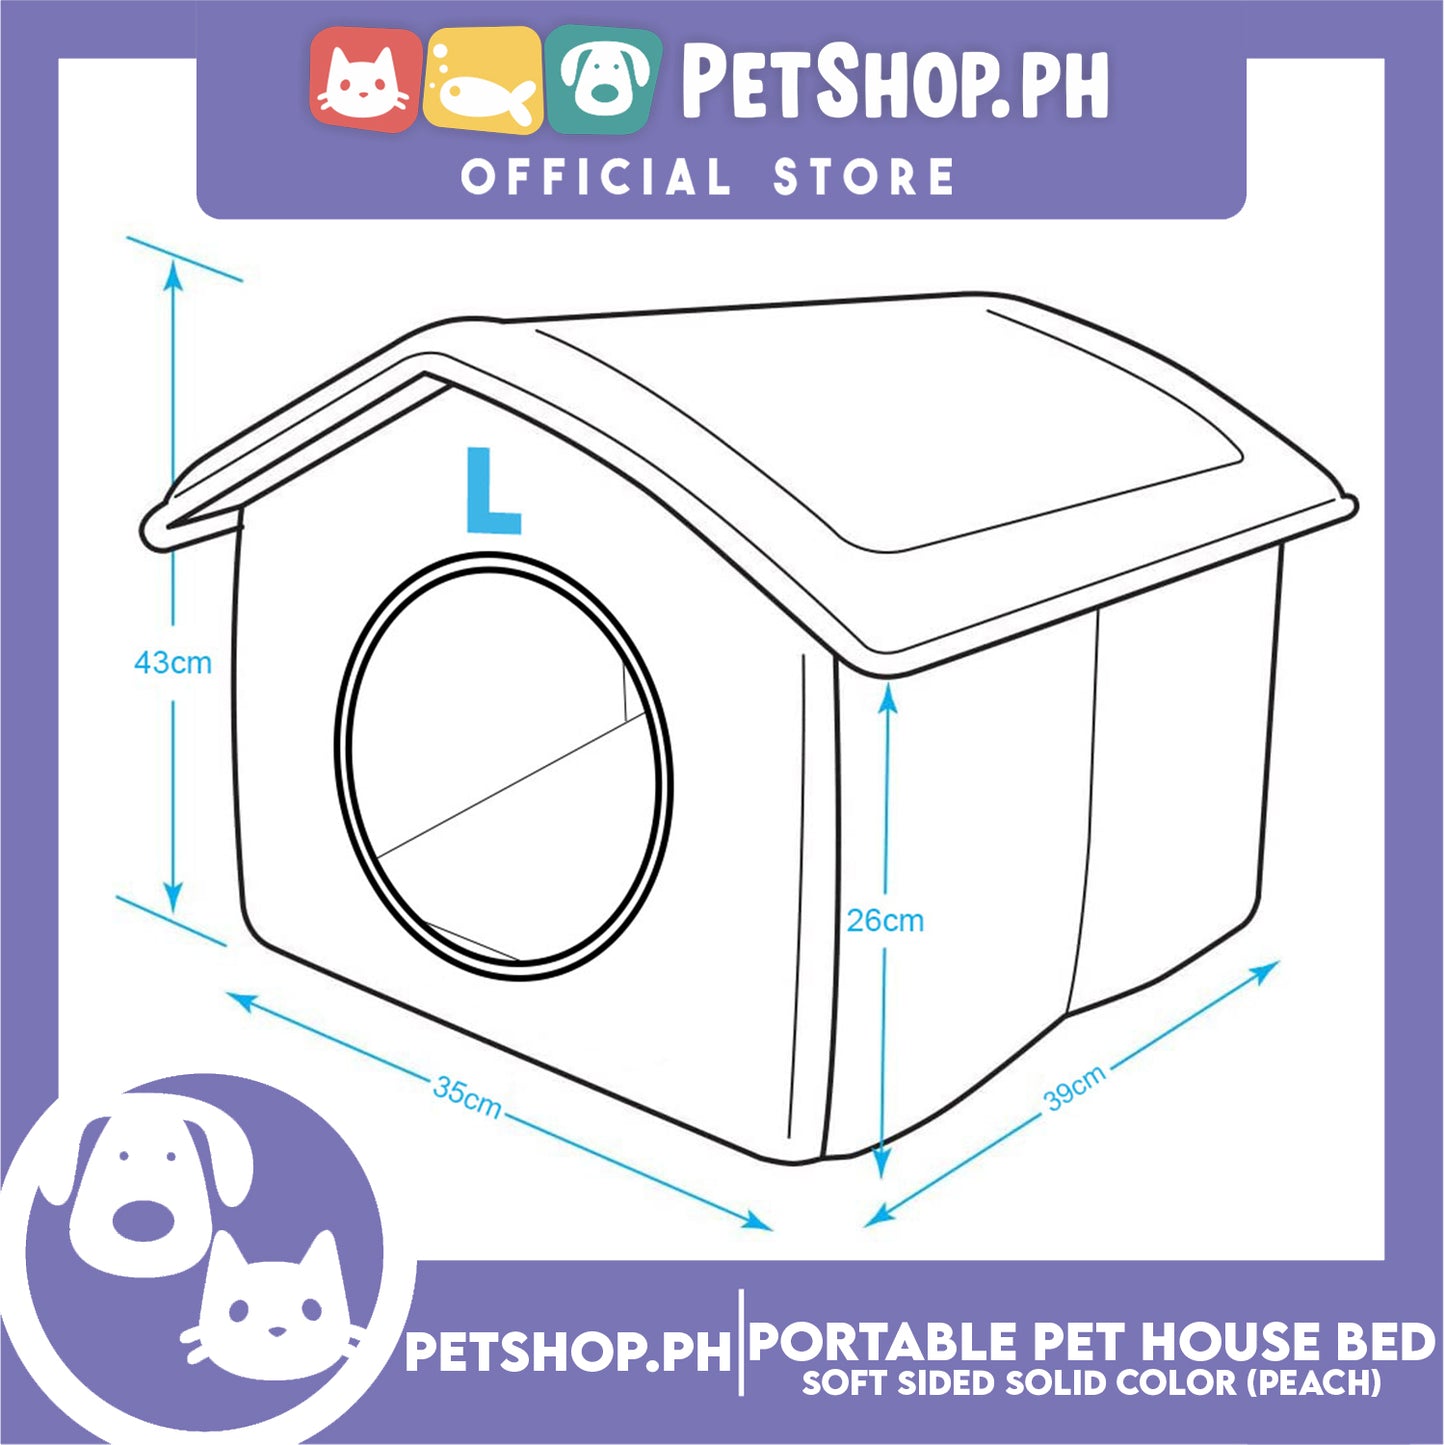 Portable Pet House Bed With Soft Sided Solid Color 35x39x43cm Large (Peach)